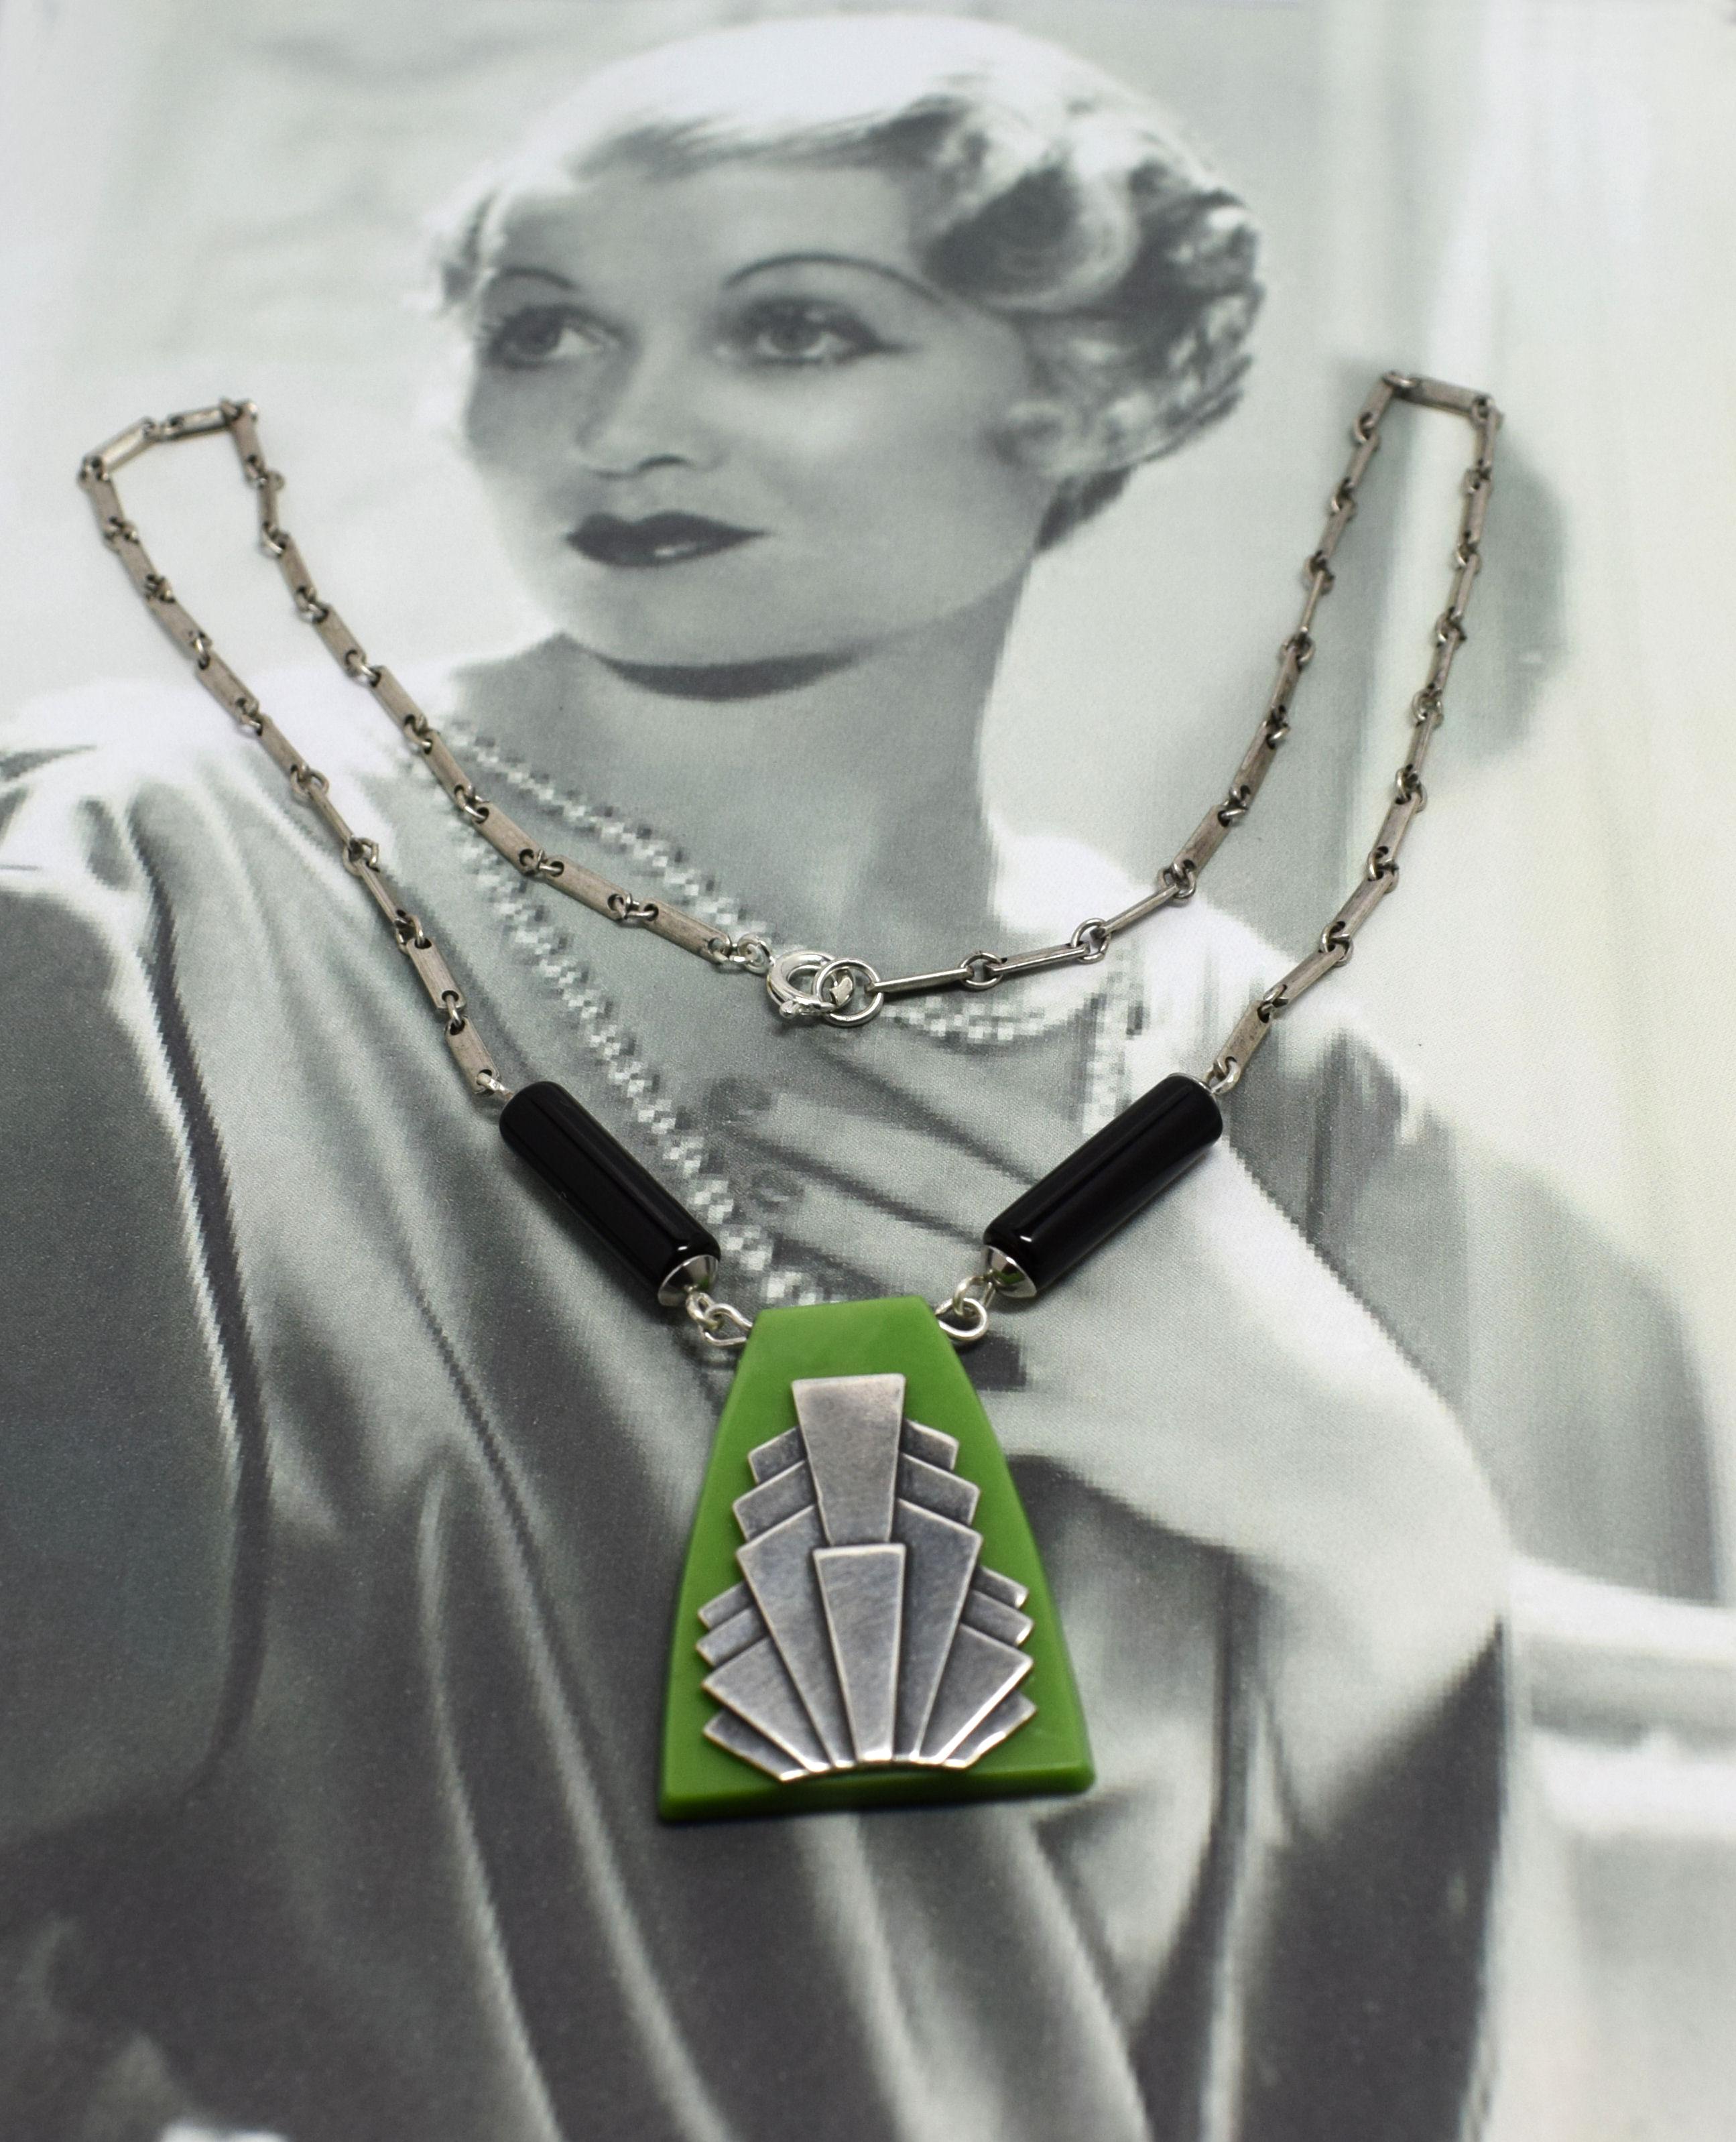 Stunning Art Deco geometric necklace made from green galalith and black lucite. Wonderful fan shape accent in chromed metal to the center of the bakelite, really iconic and can't be mistaken for any other era. As one of the leading manufacturers of